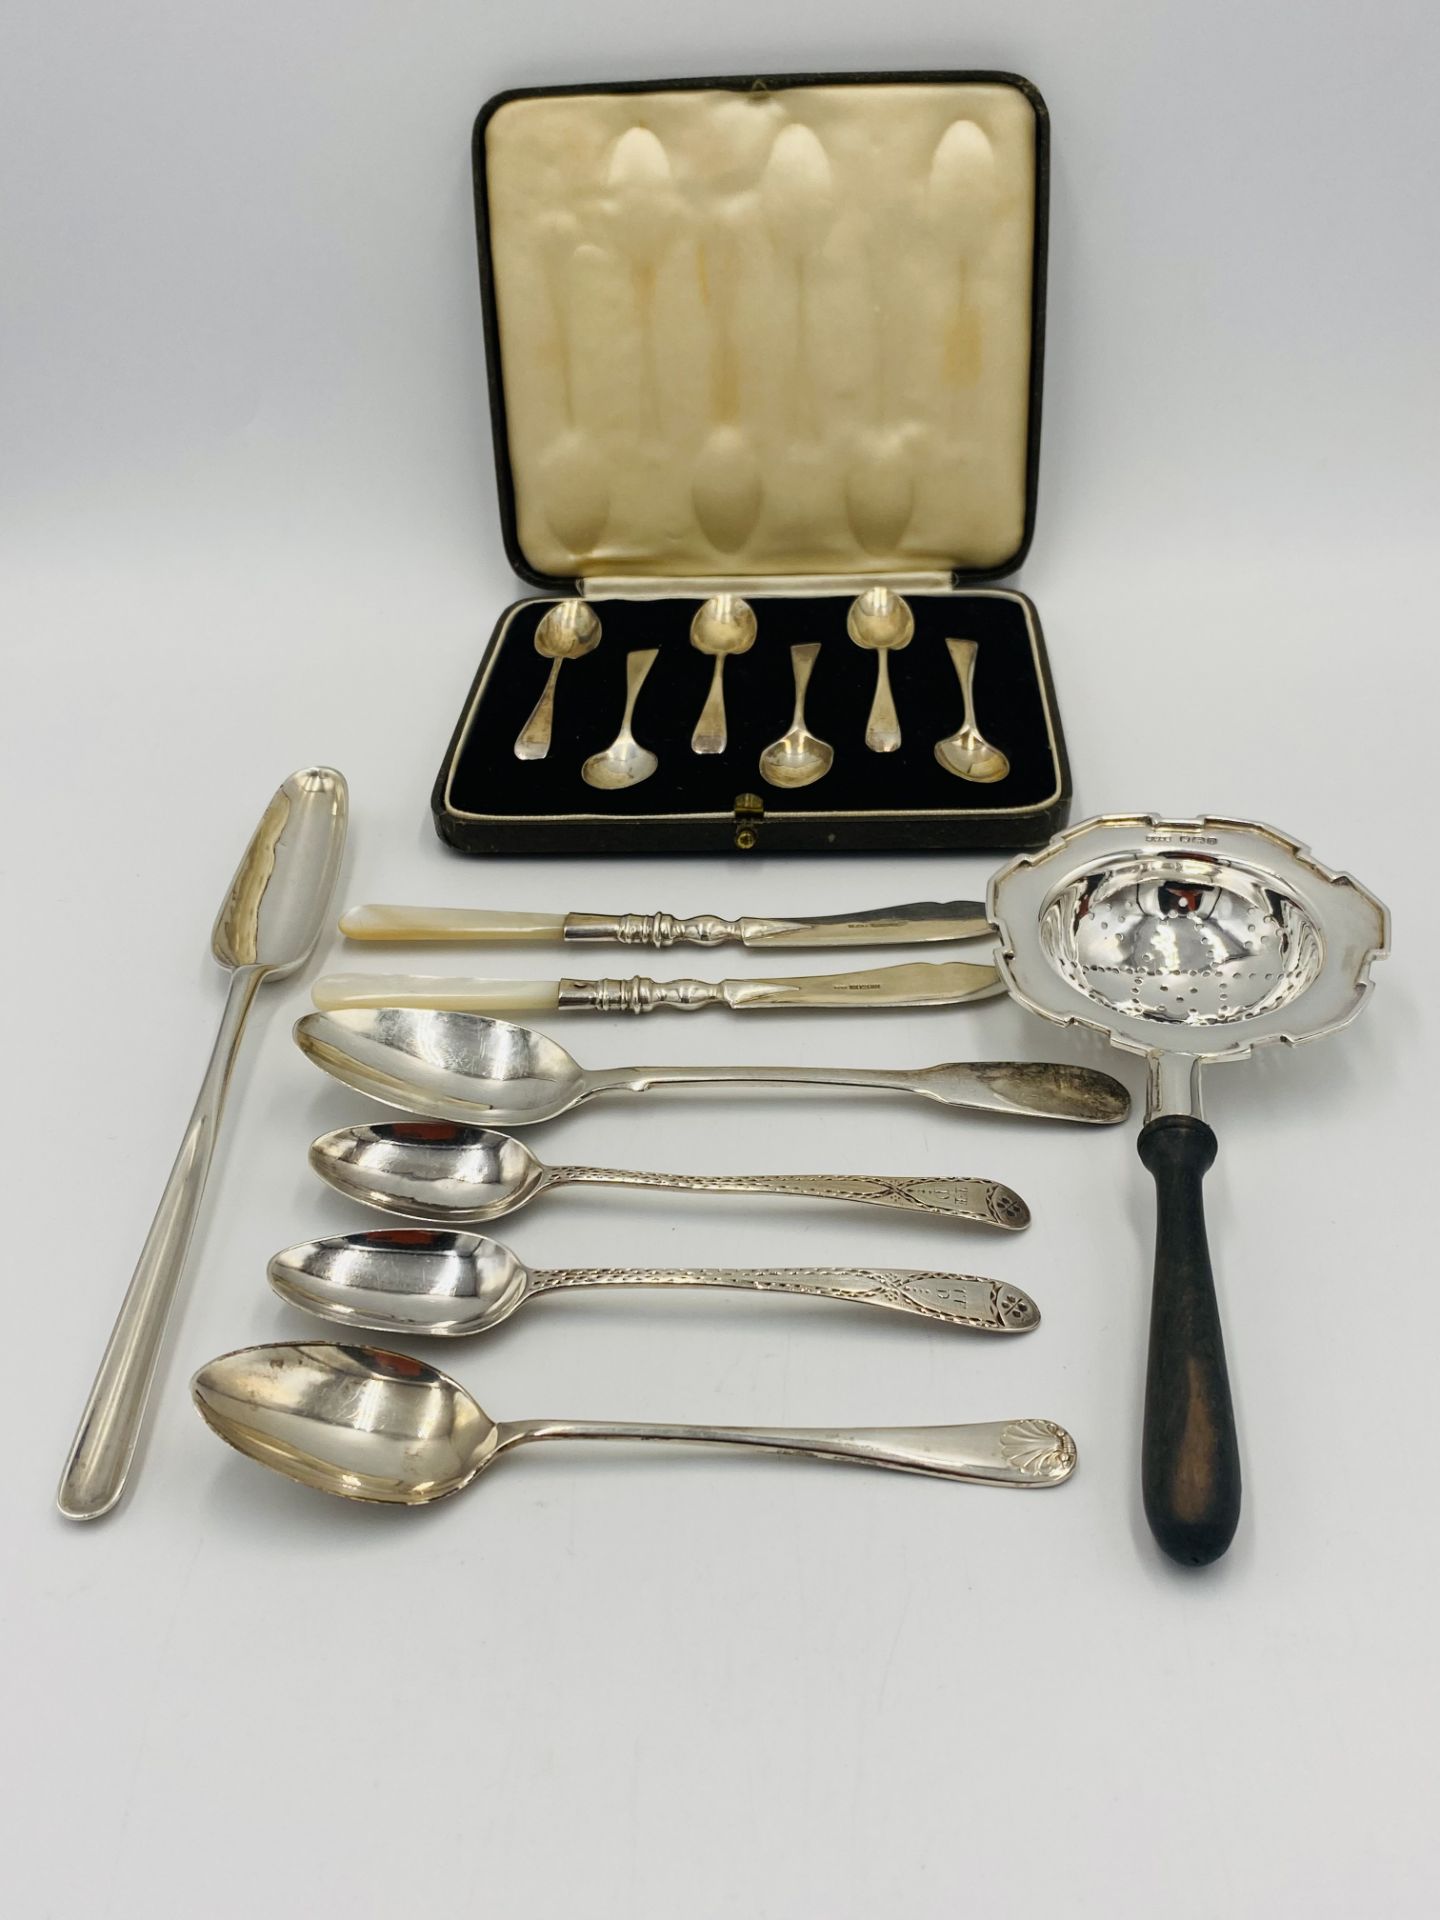 Boxed set of silver spoons and other silver flatware - Image 2 of 5